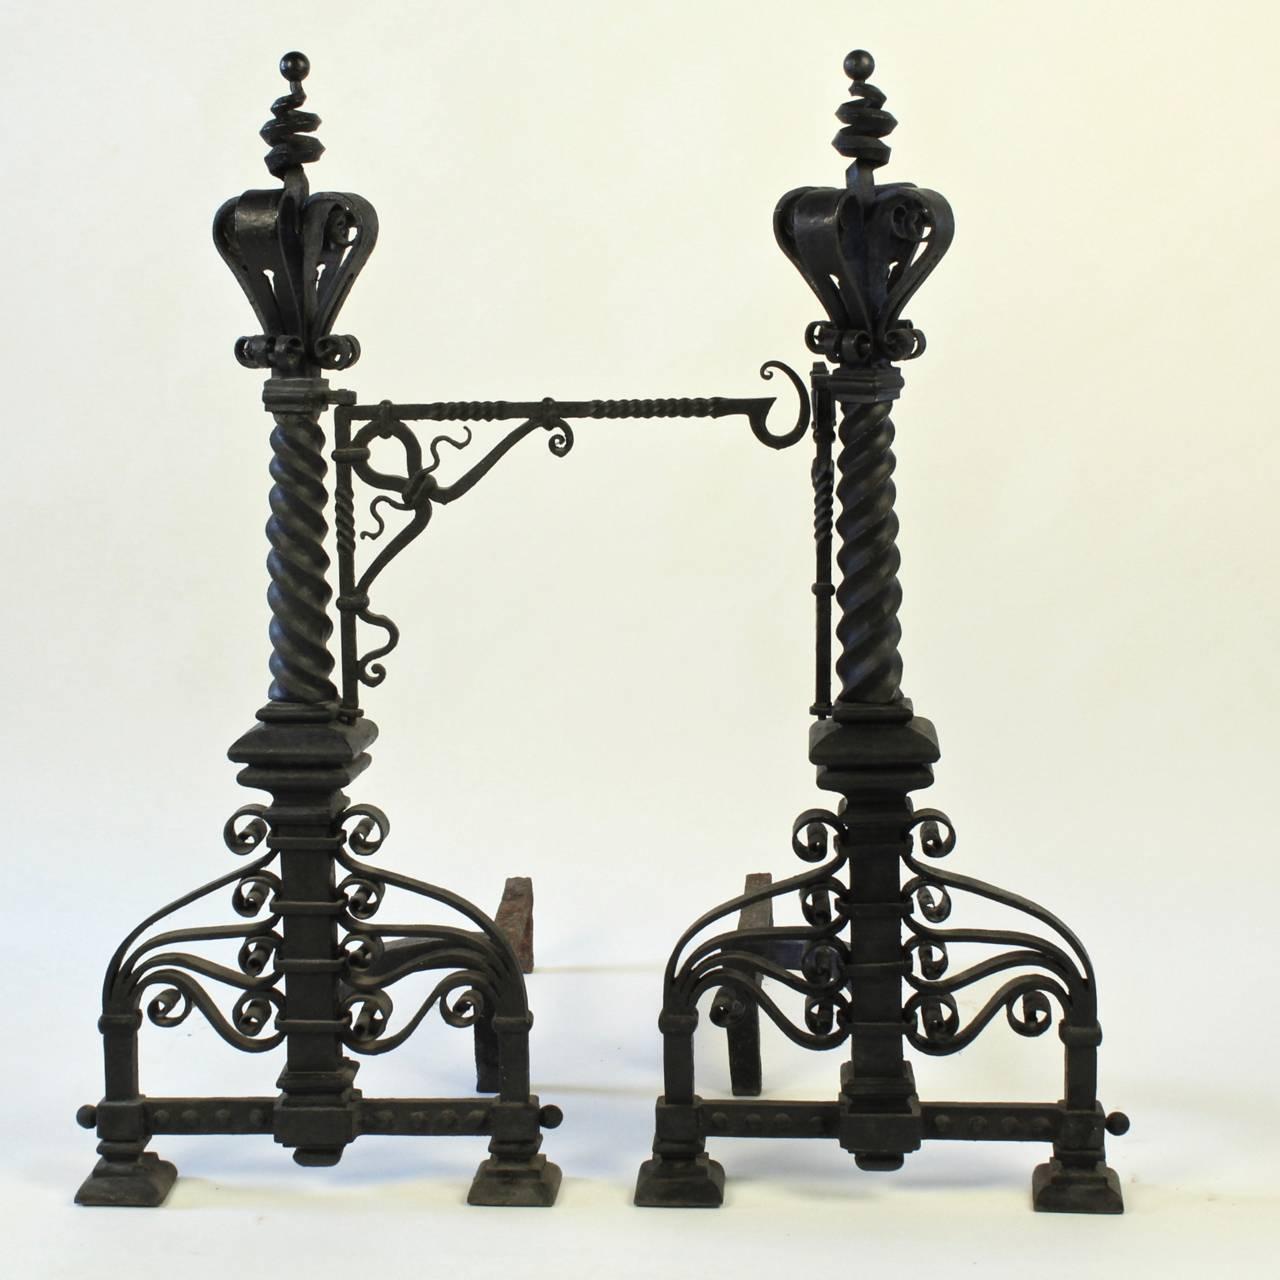 19th Century Pair of Very Large Arts & Crafts Wrought Iron Fireplace Andirons, 1880s-1900s